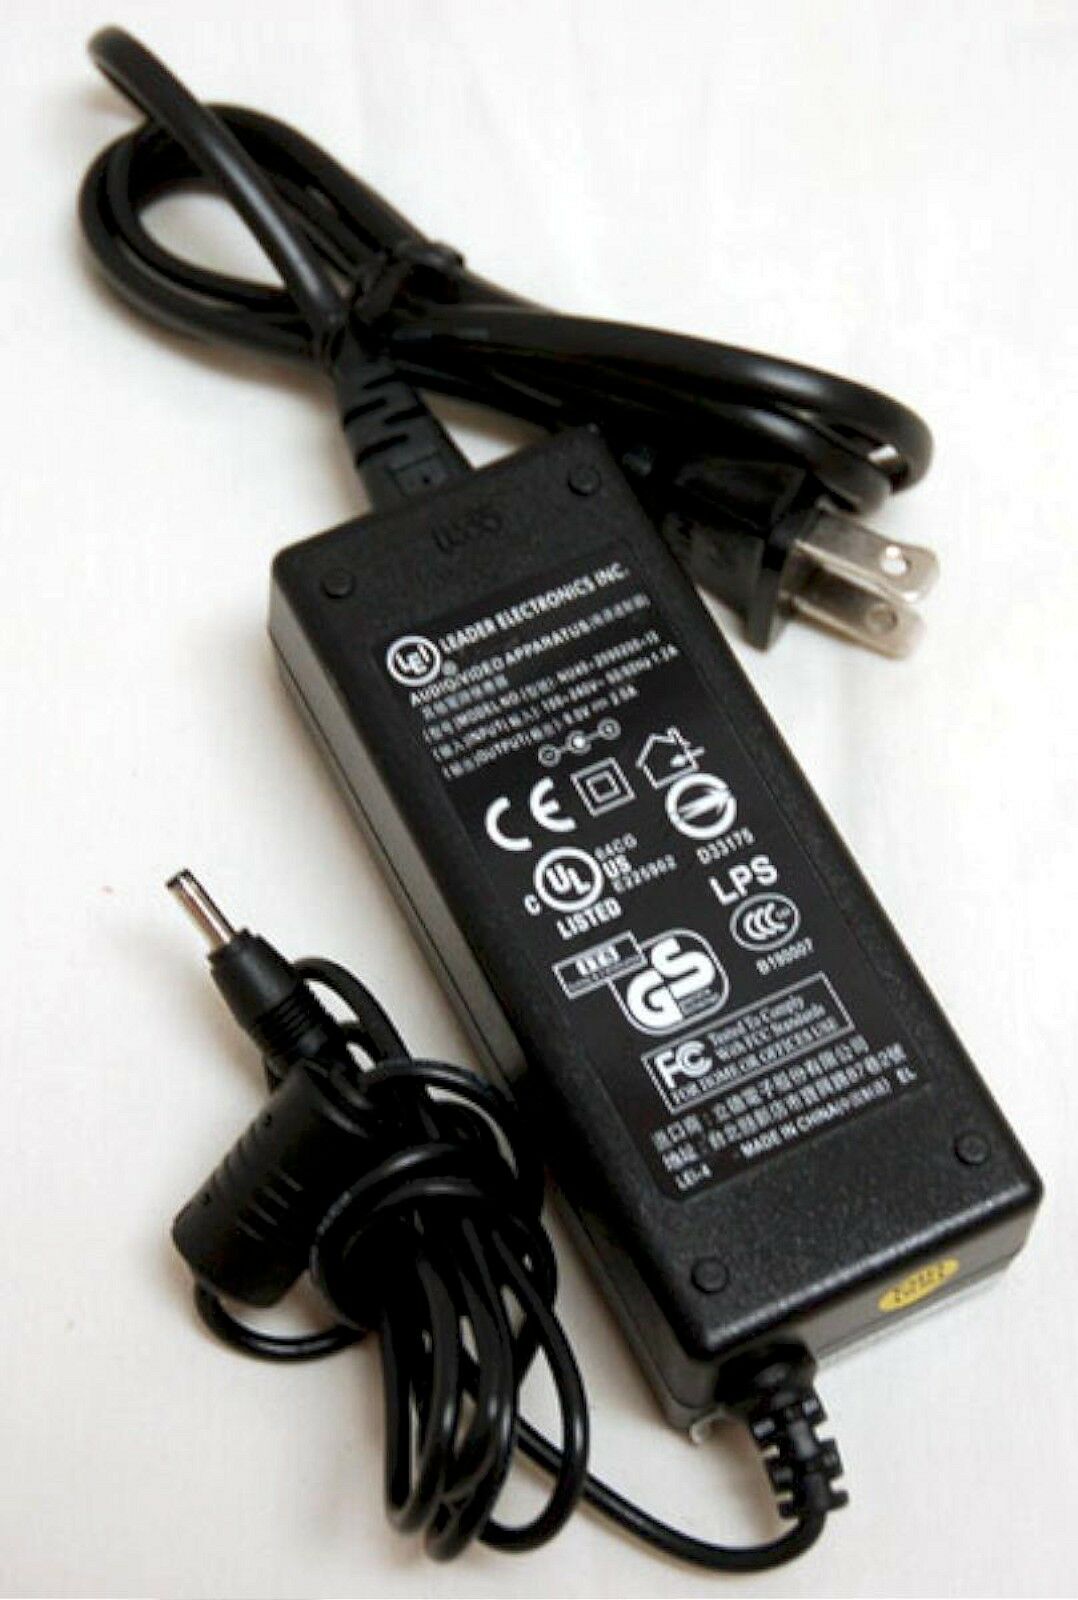 NEW LEI 9.0V 2.0A NU40-2090200-13 AC ADAPTER FOR Audiovox D1700 Portable DVD Player AC ADAPTER AMW M